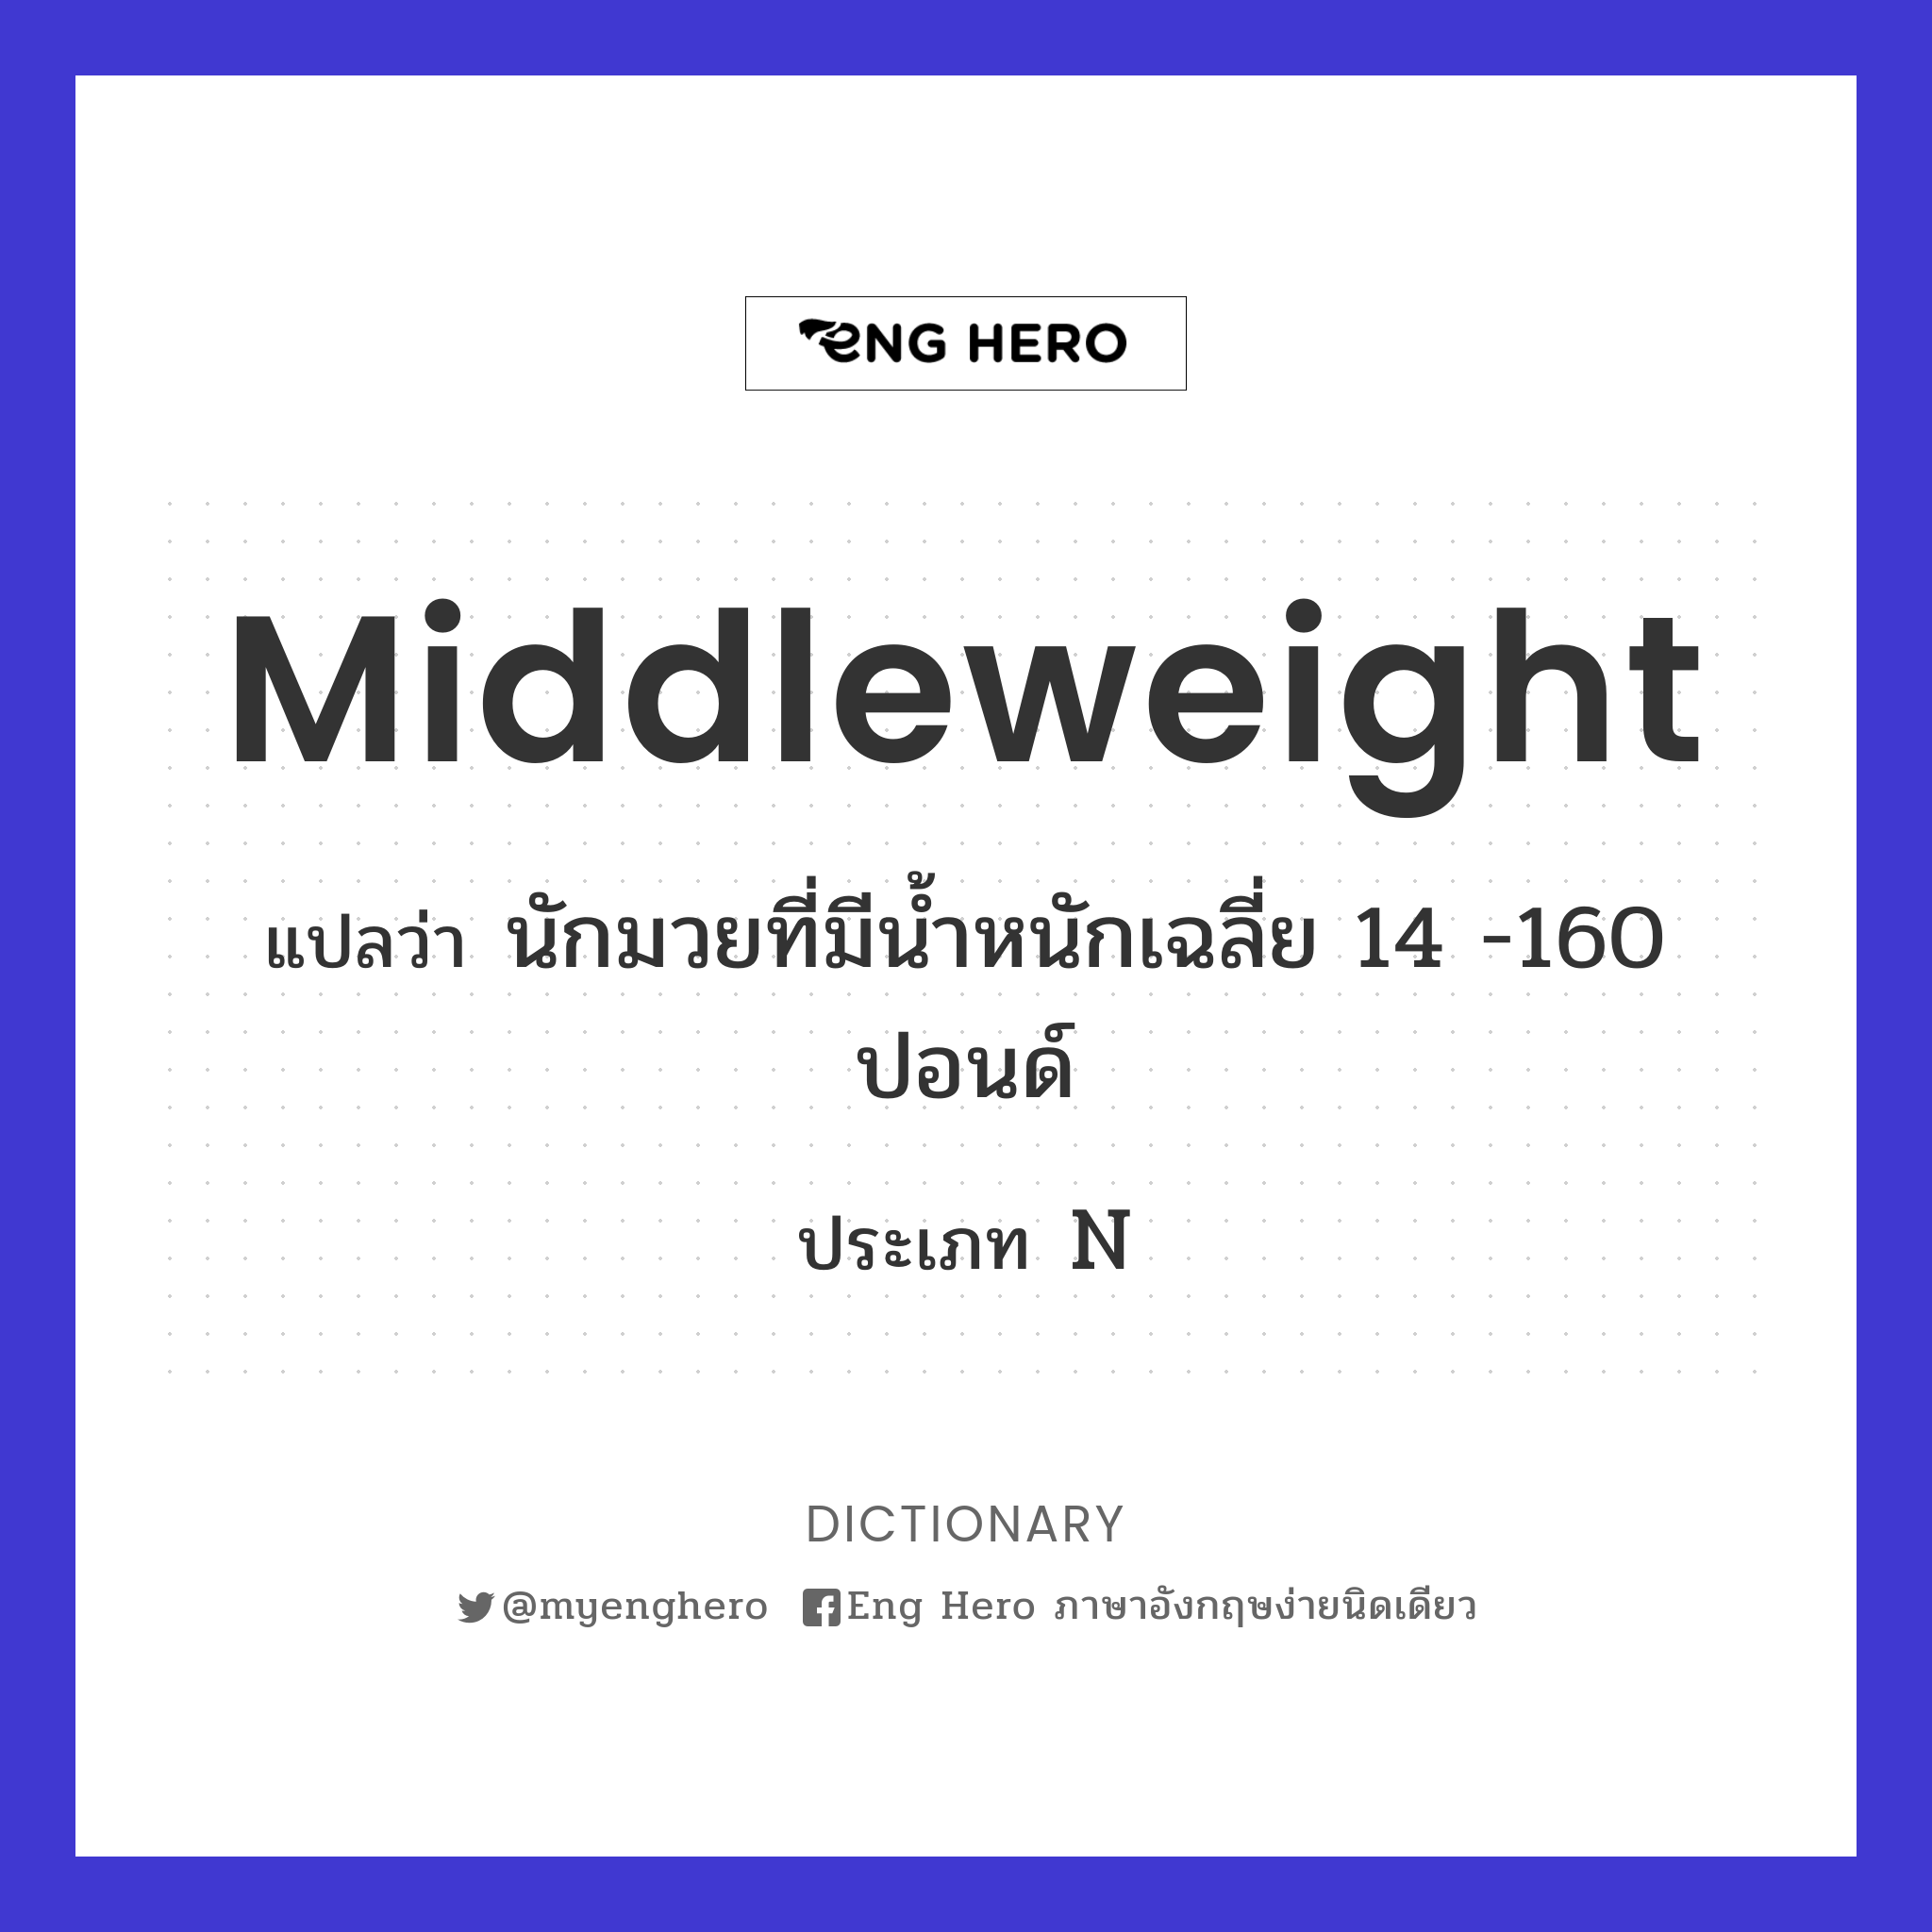 middleweight